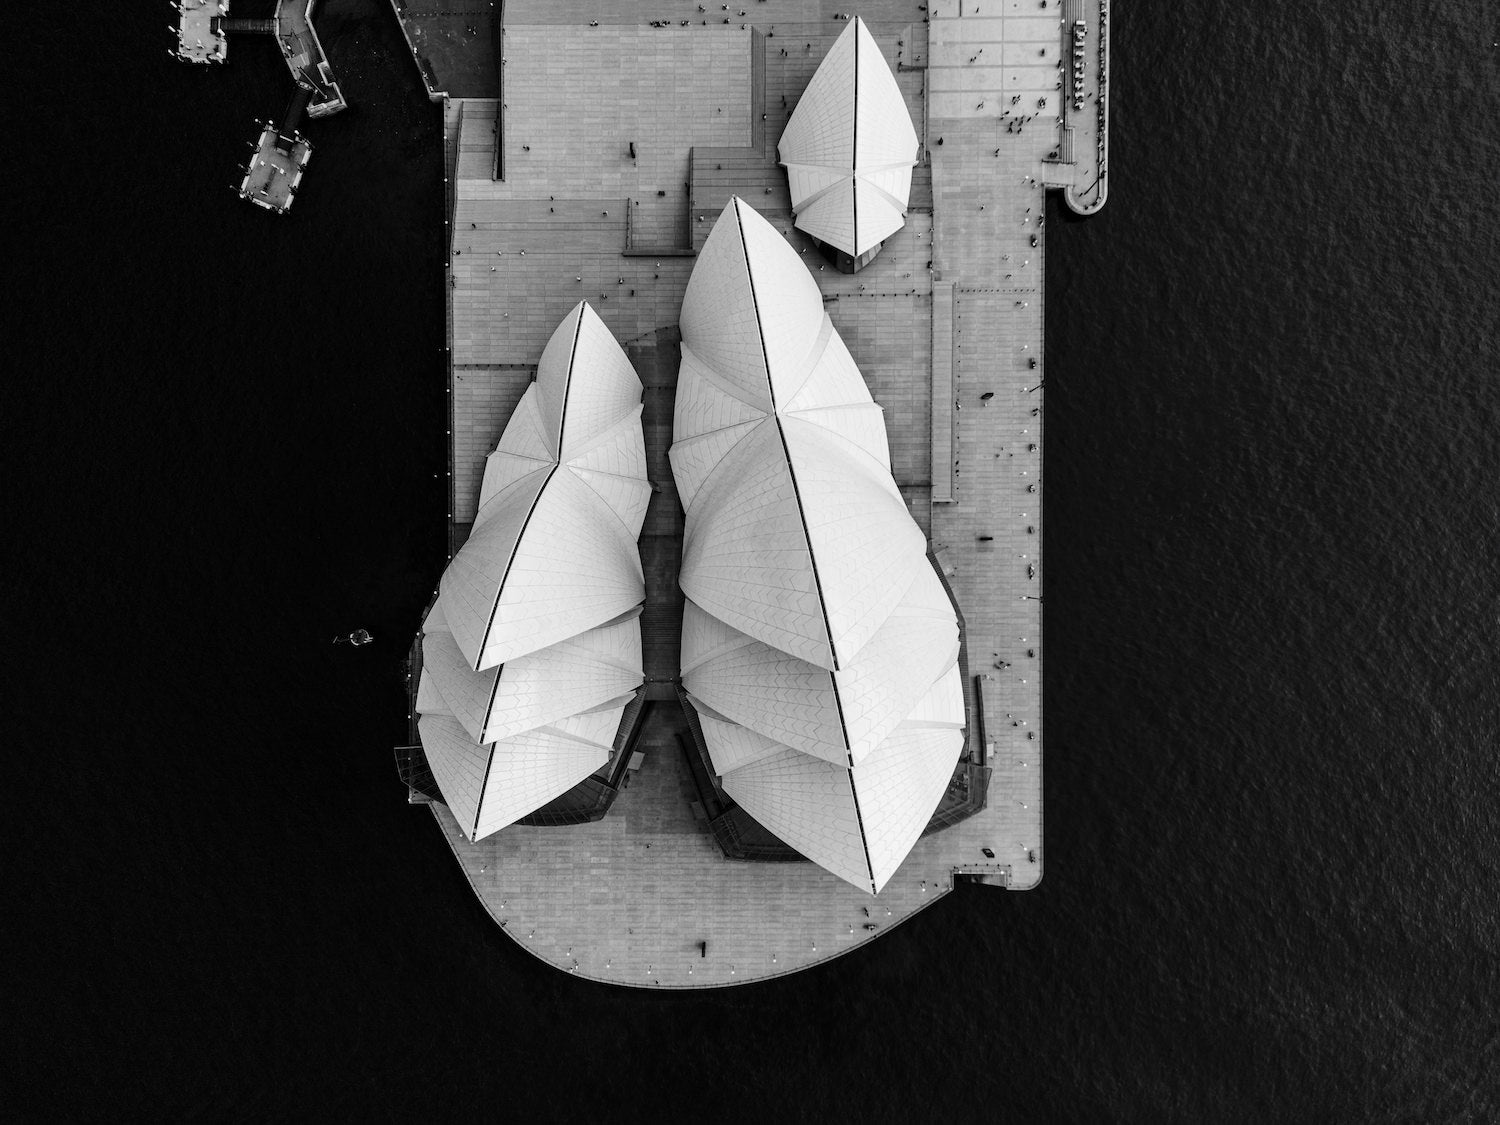 Sydney Opera House From Above in Black & White - Peter Yan Studio